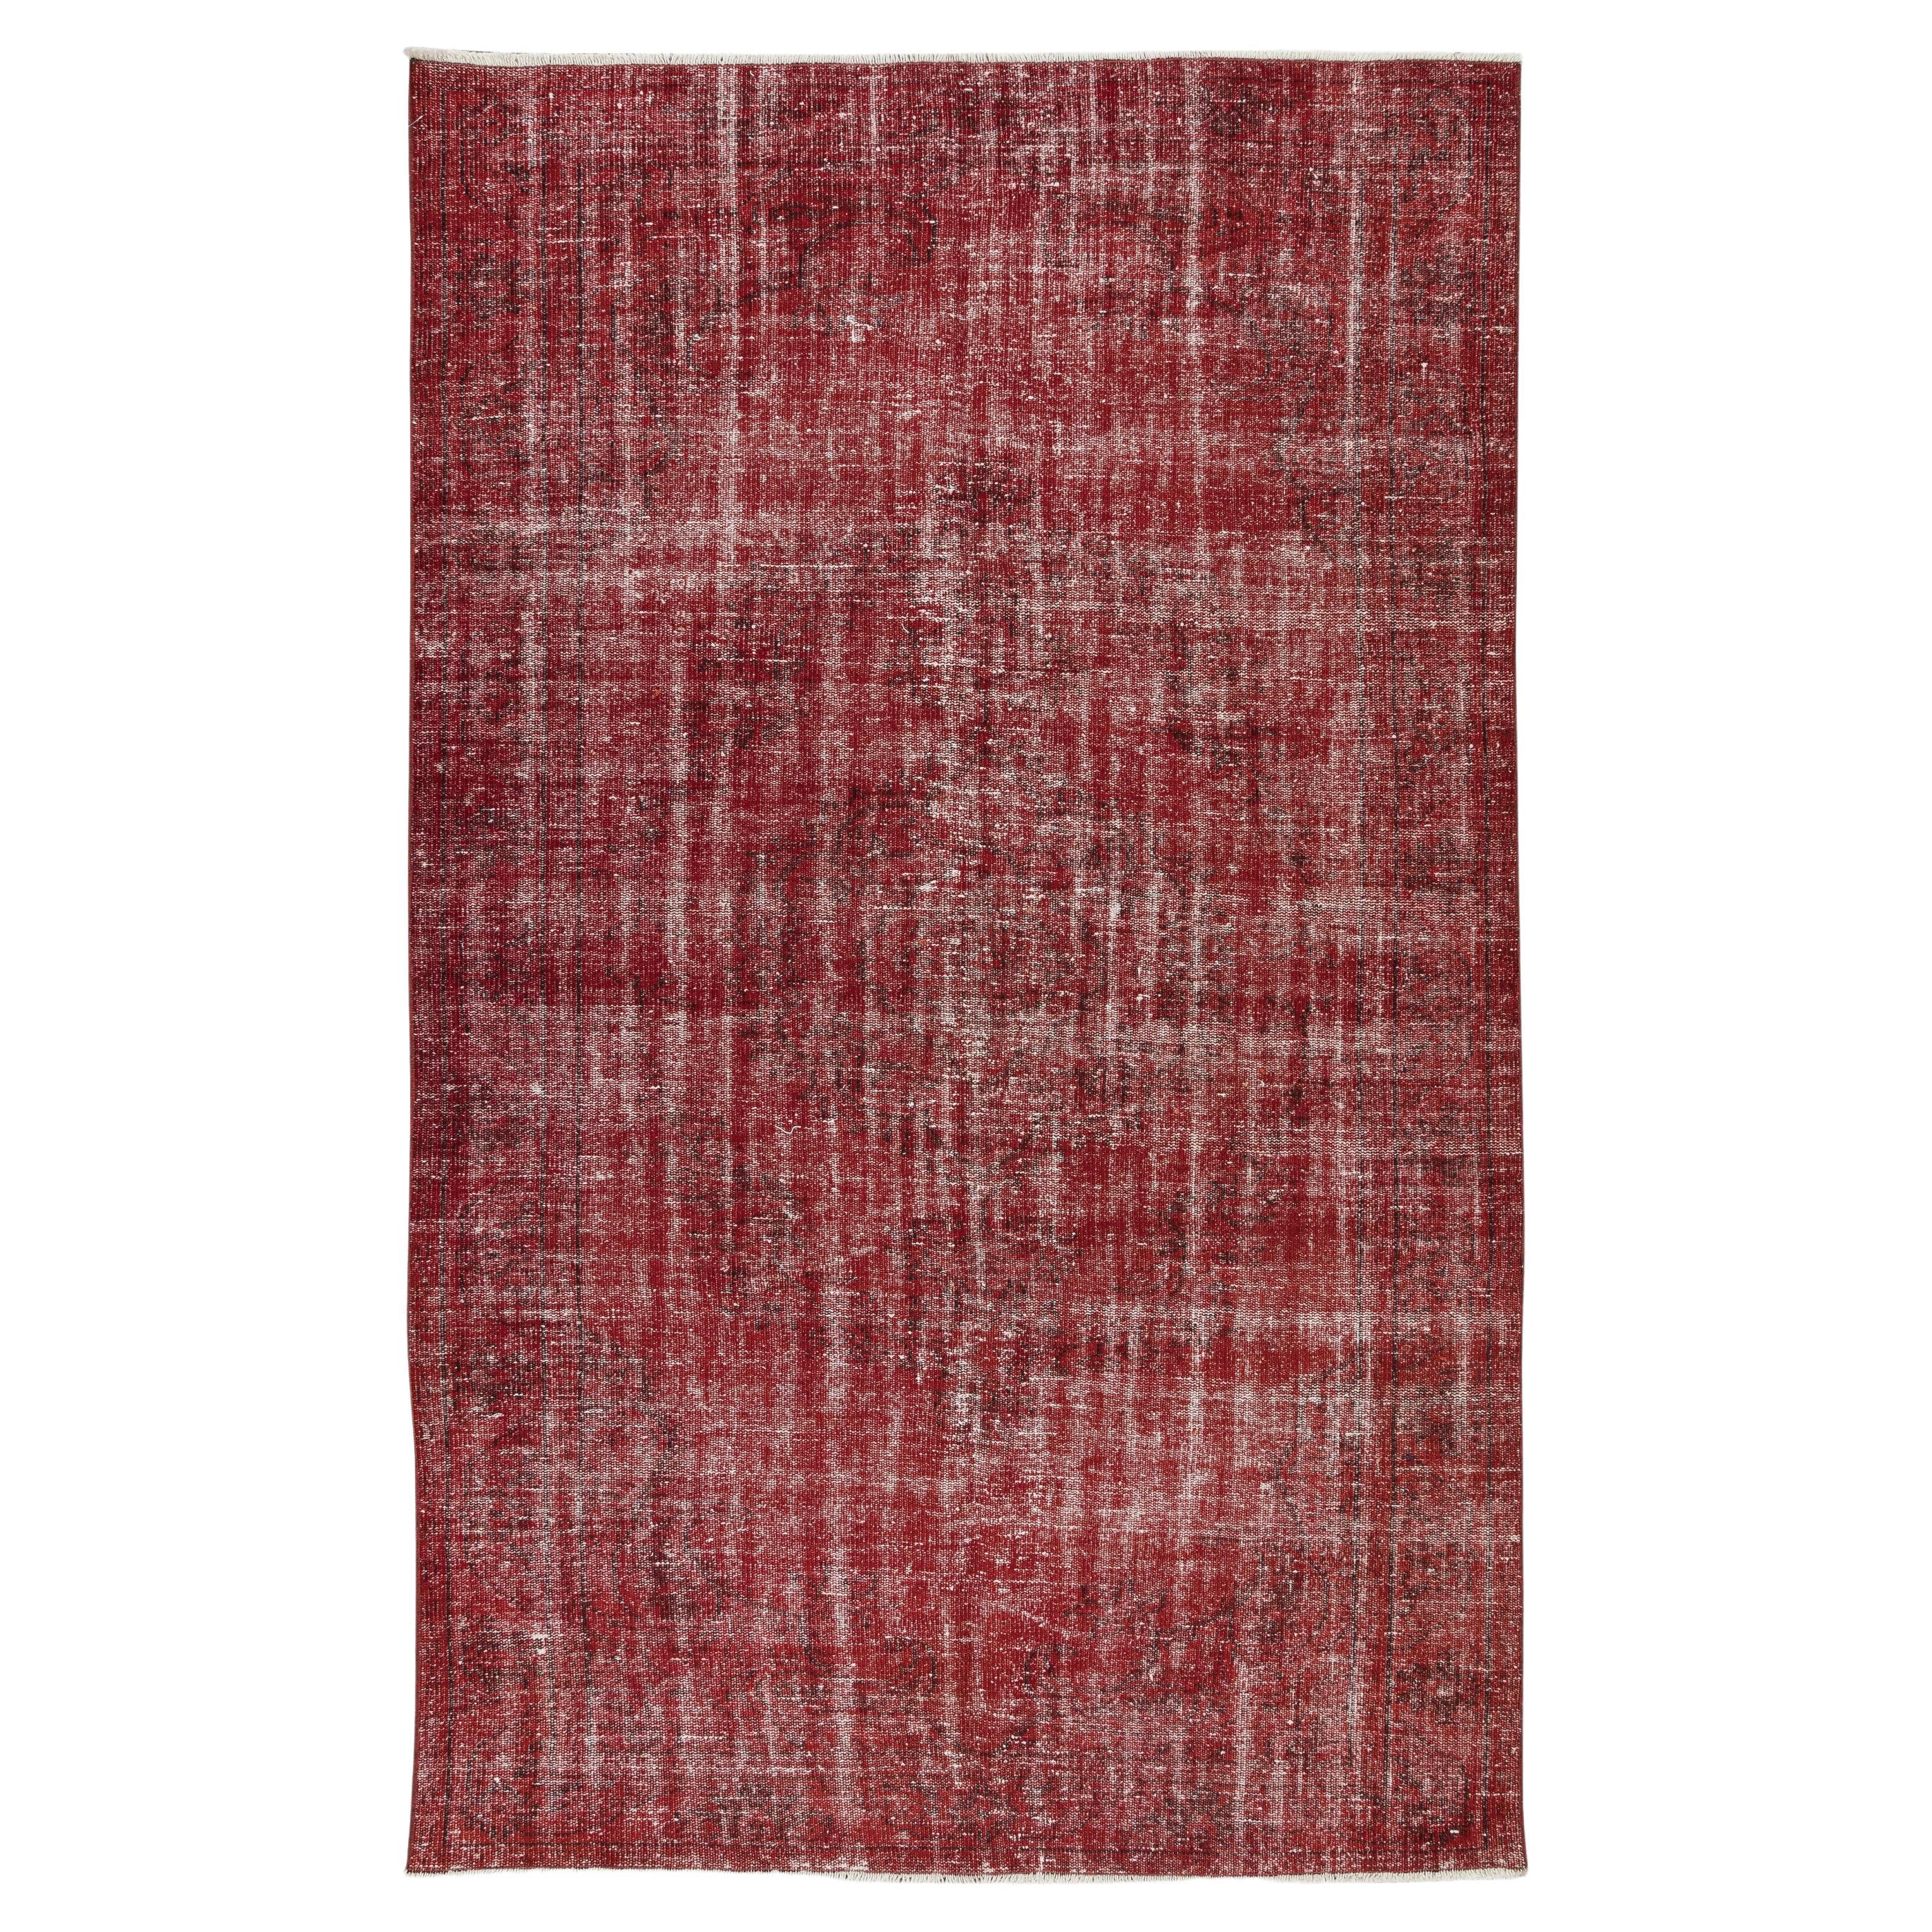 Vintage Handmade Turkish Rug Over-Dyed in Red, Great for Office & Home